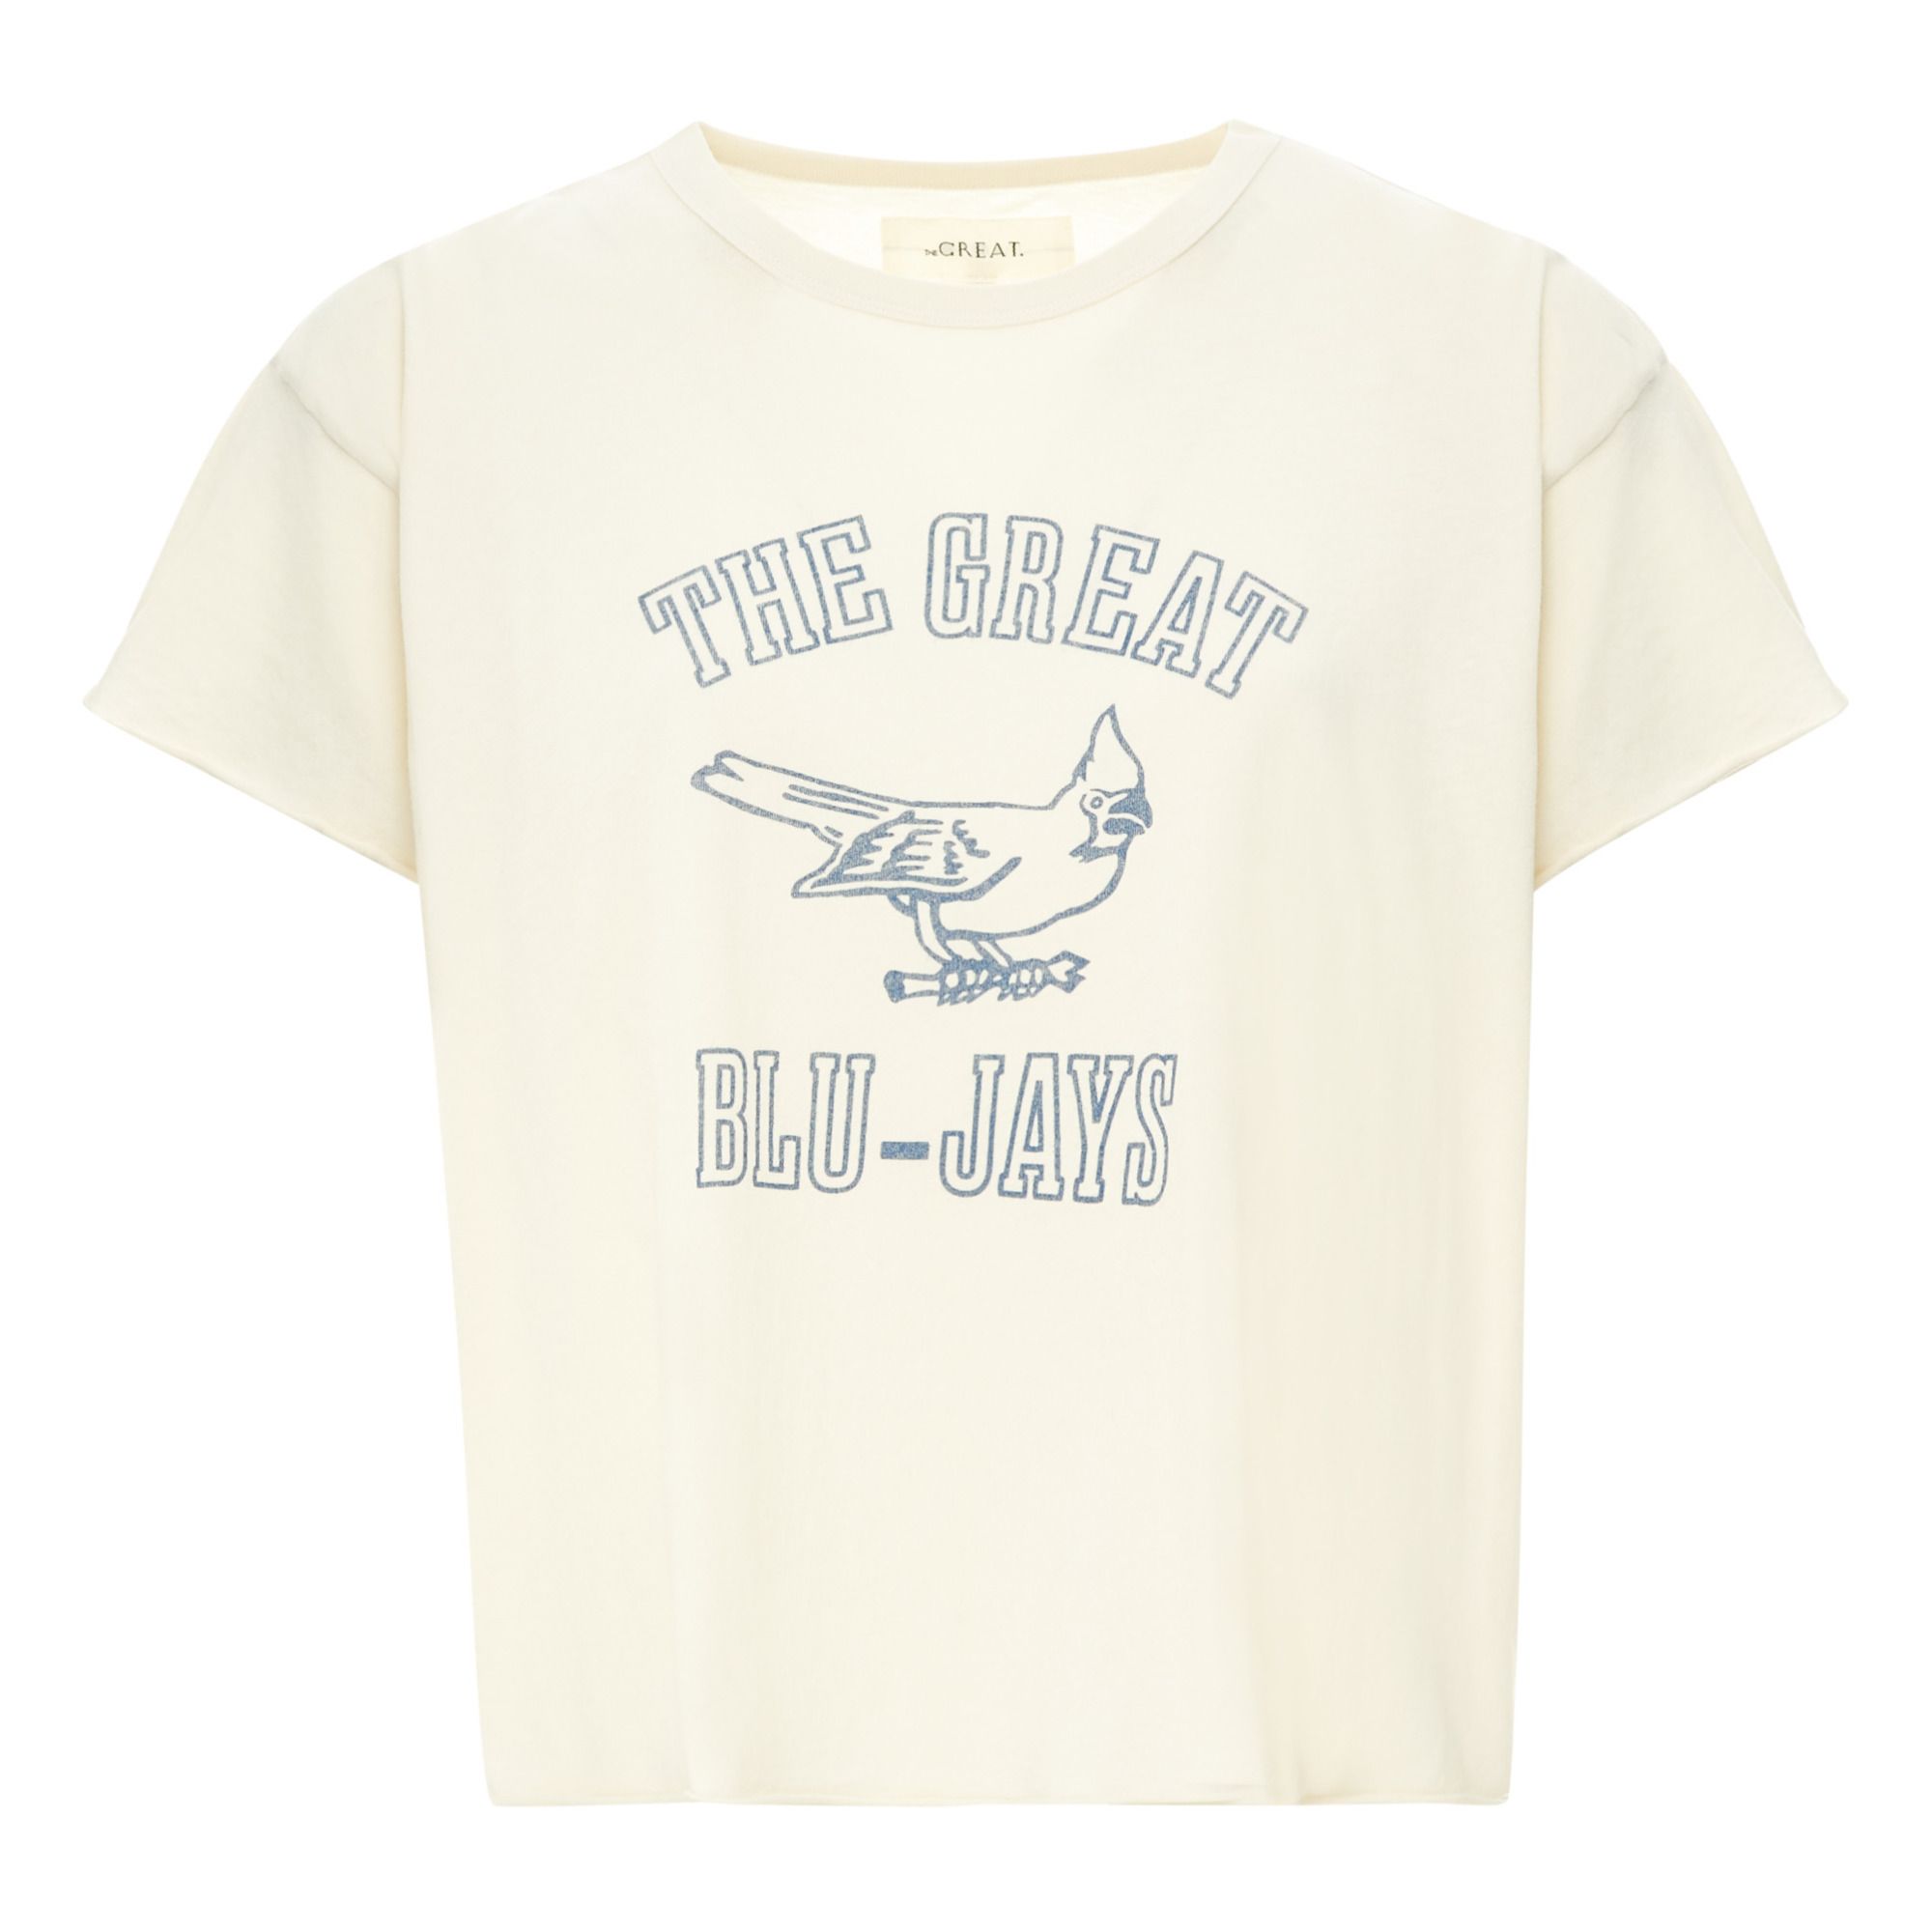 The Great - T-shirt The Crop Tee W/Blue Jay Graphic - Femme - Ecru